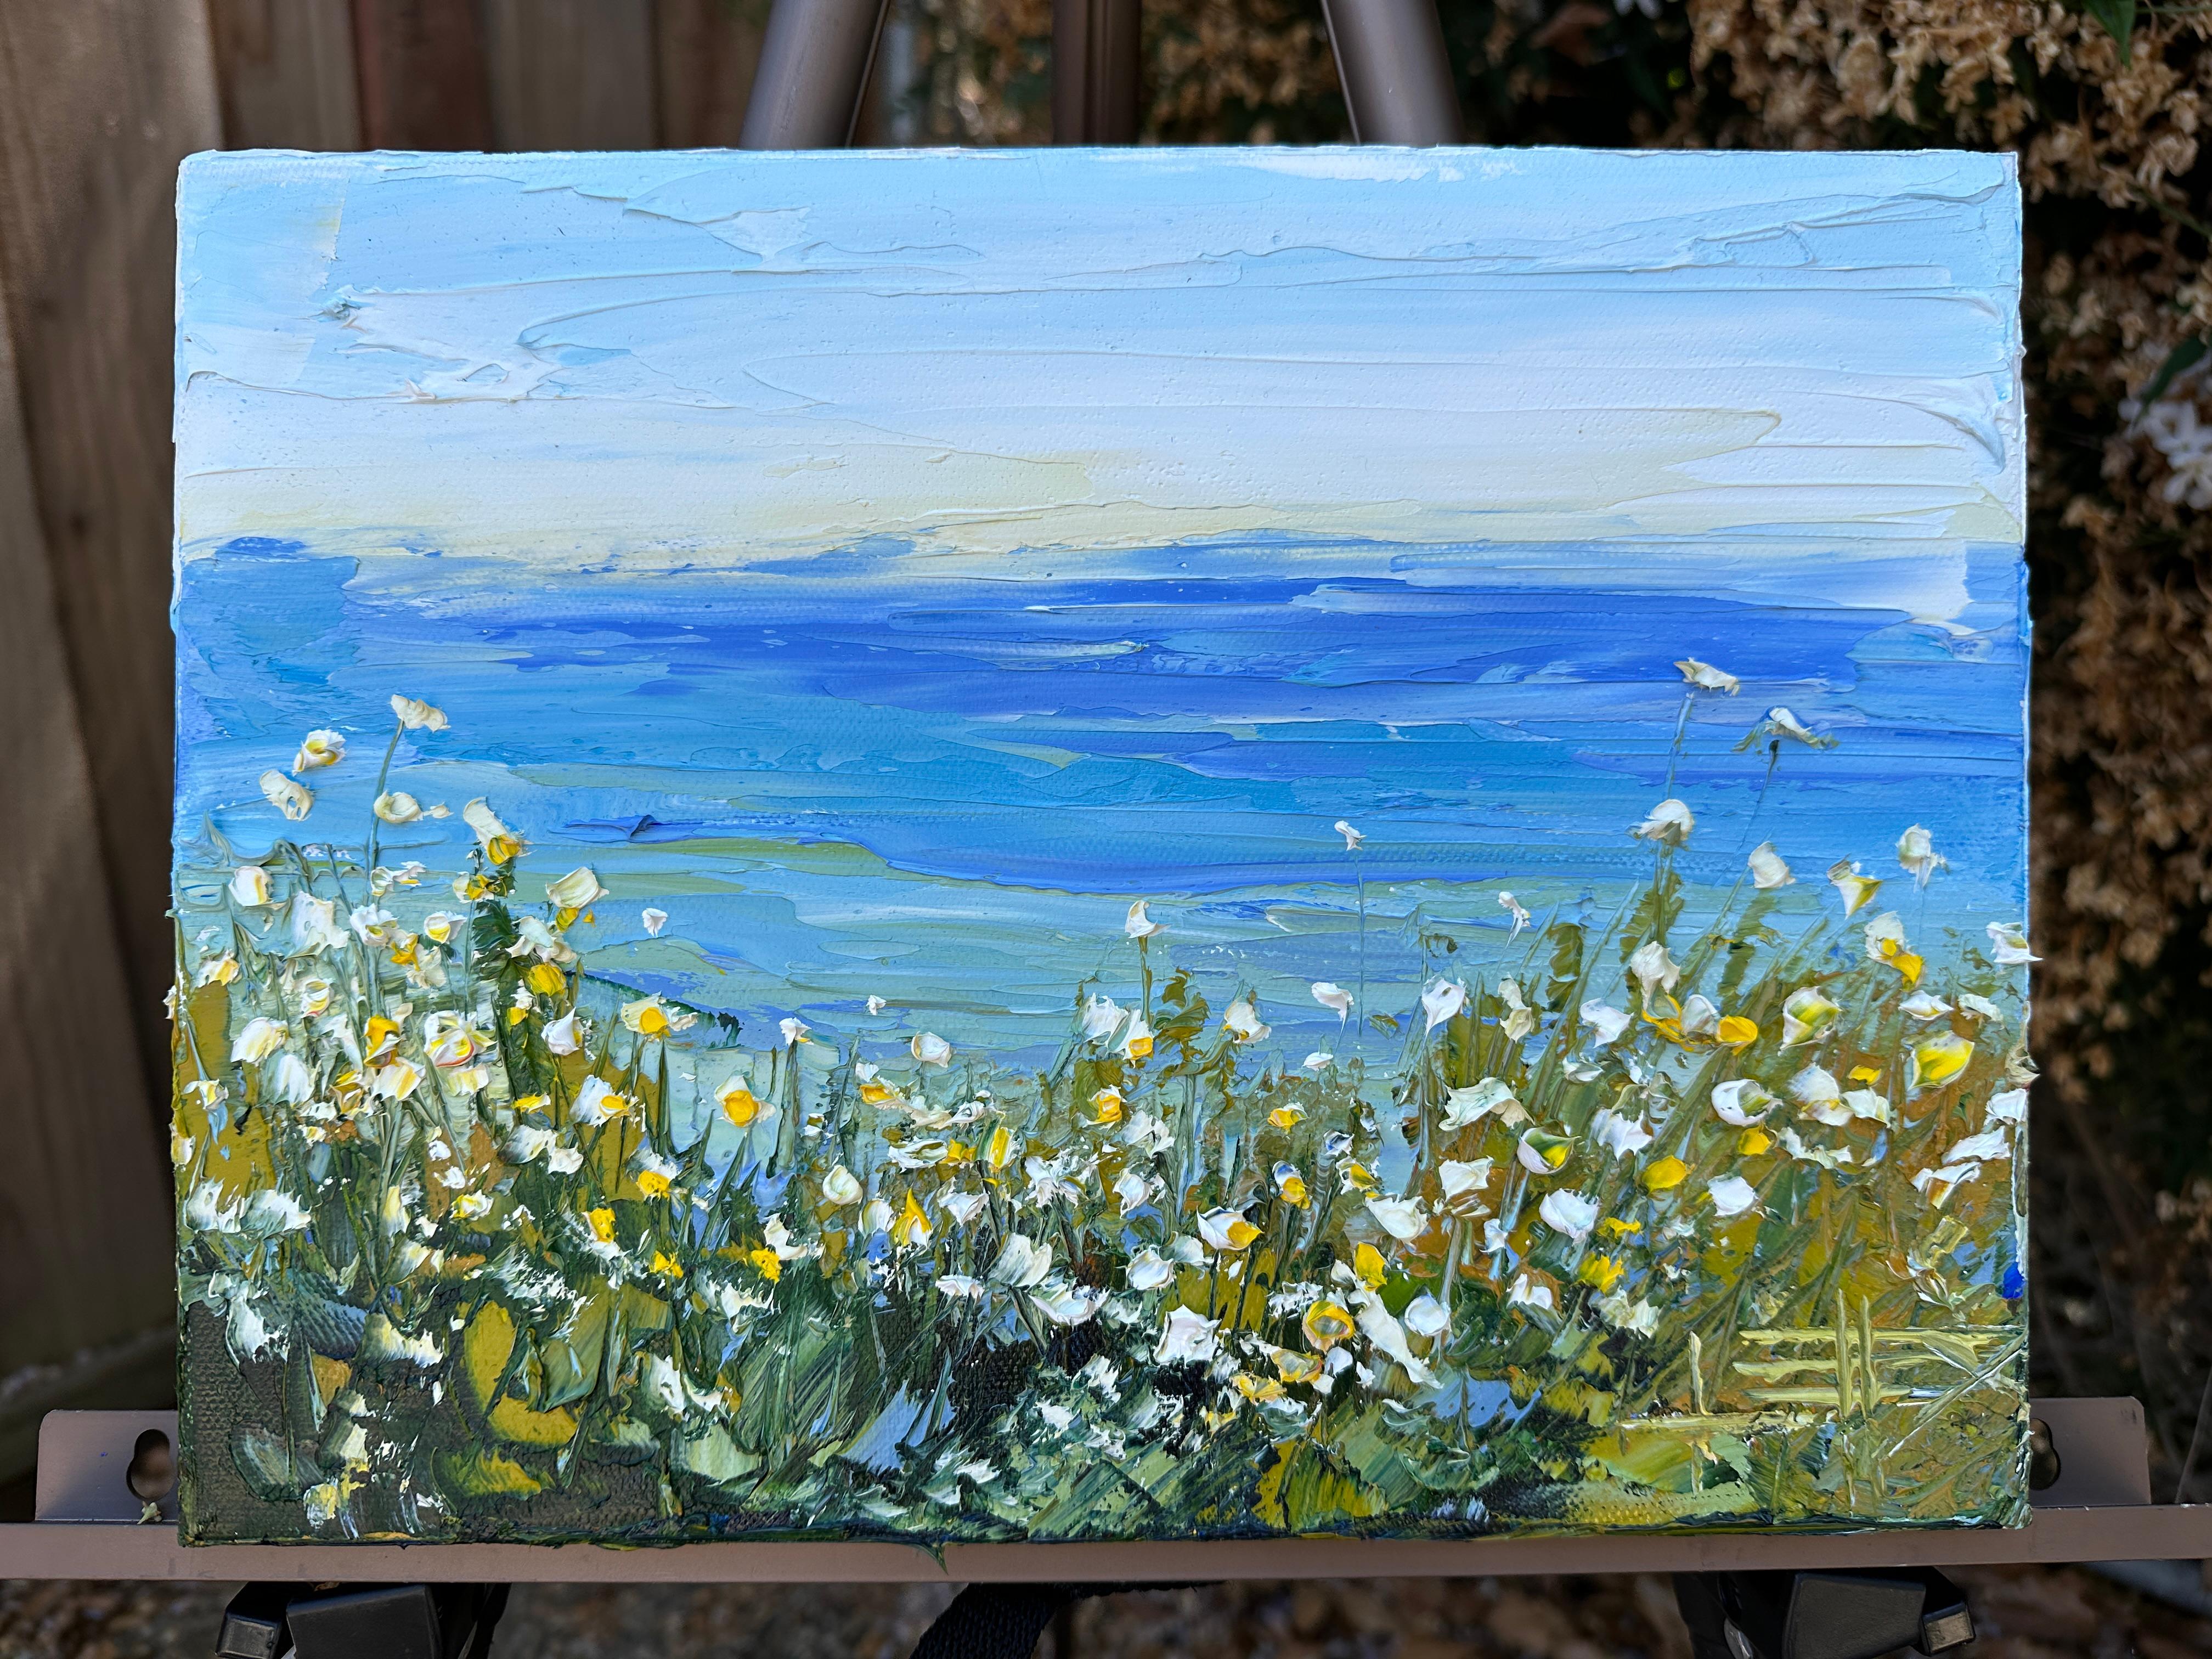 <p>Artist Comments<br>Wildflowers sway with the sea breeze, their vibrant petals complementing the blueness of the sky and water. Painted en plein air, artist Lisa Elley captures the picturesque view of Monterey Bay in California, where the gentle